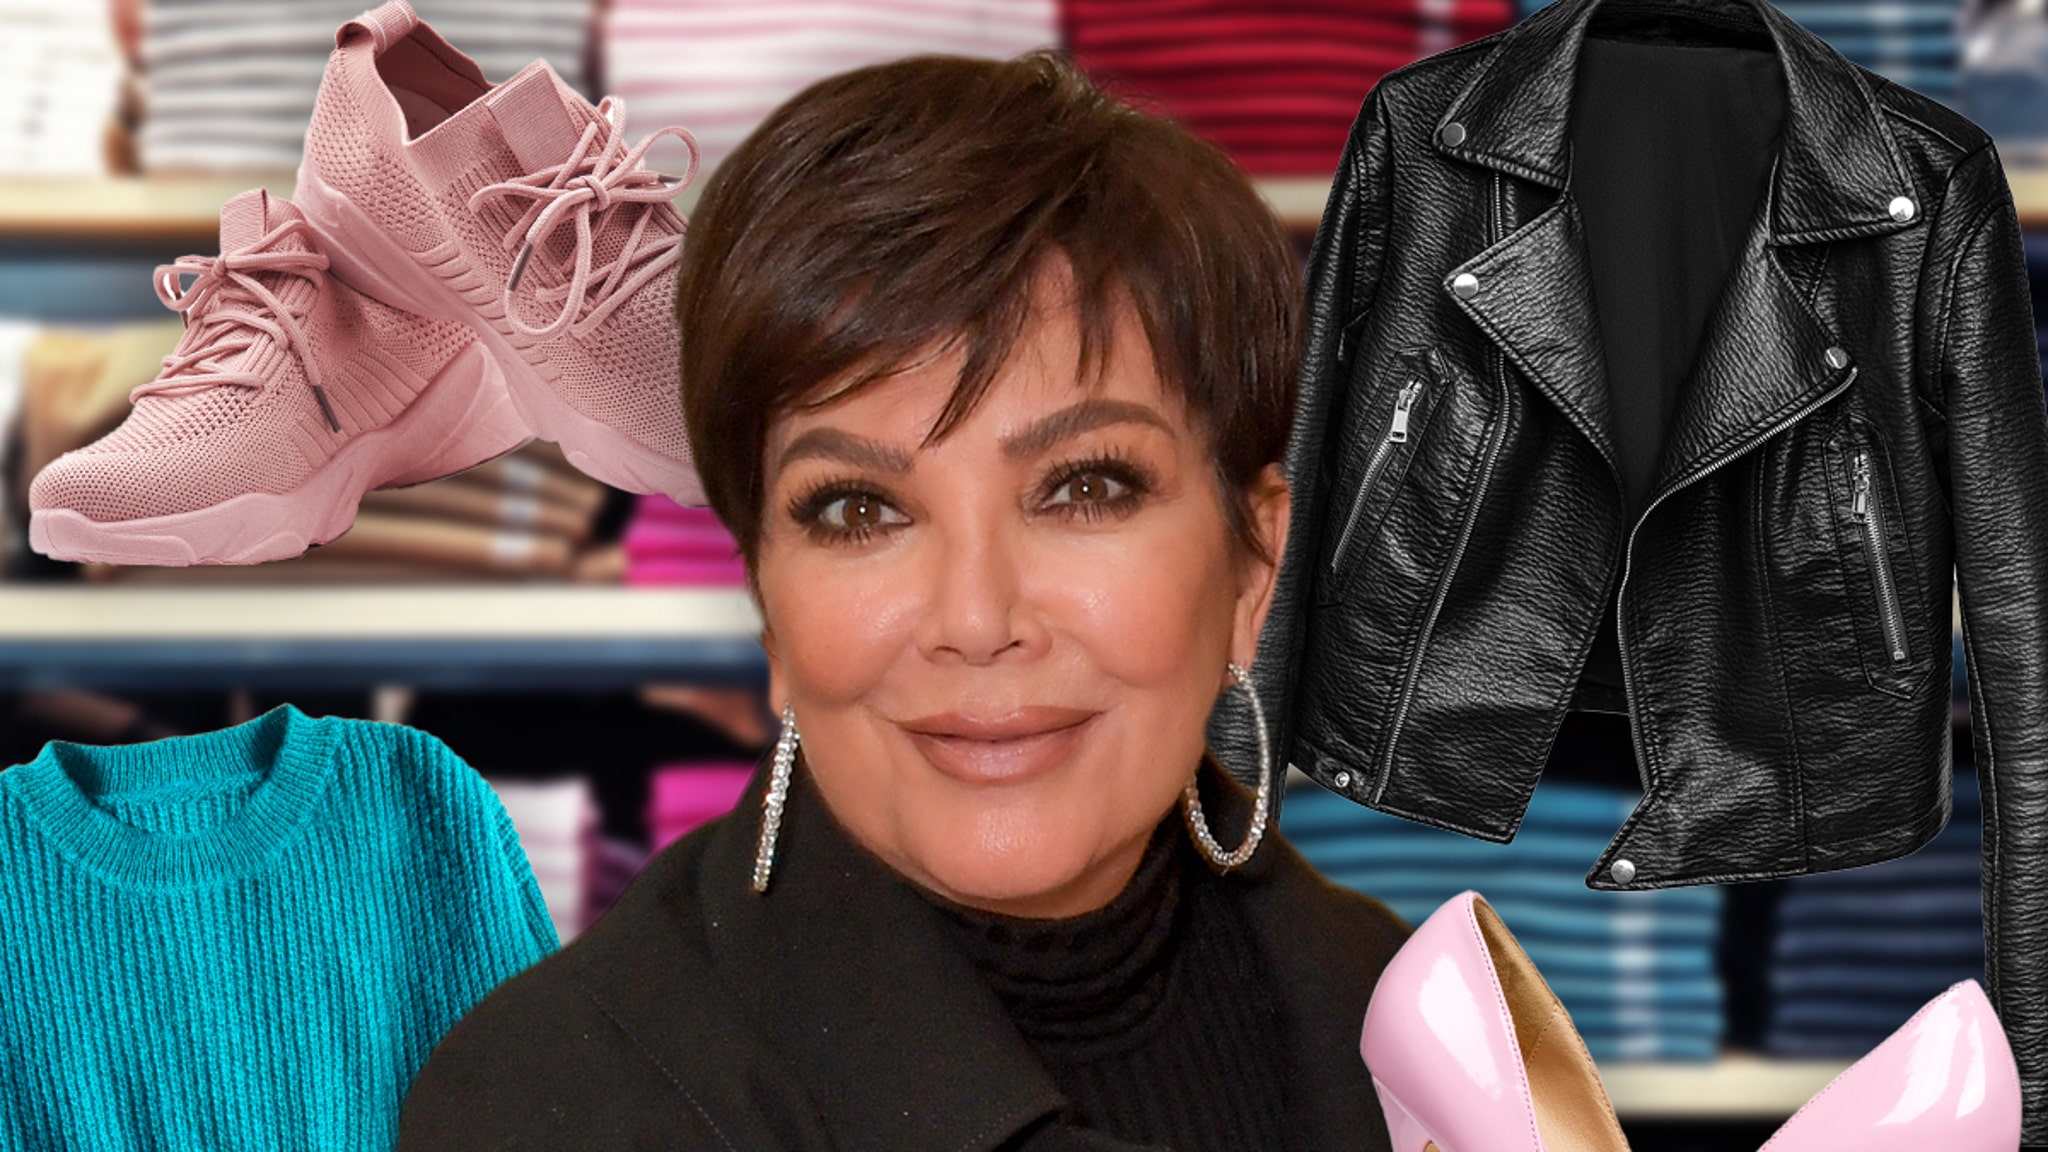 Kris Jenner Files to Lock Down Rights to Her Name for Possible Clothing Line